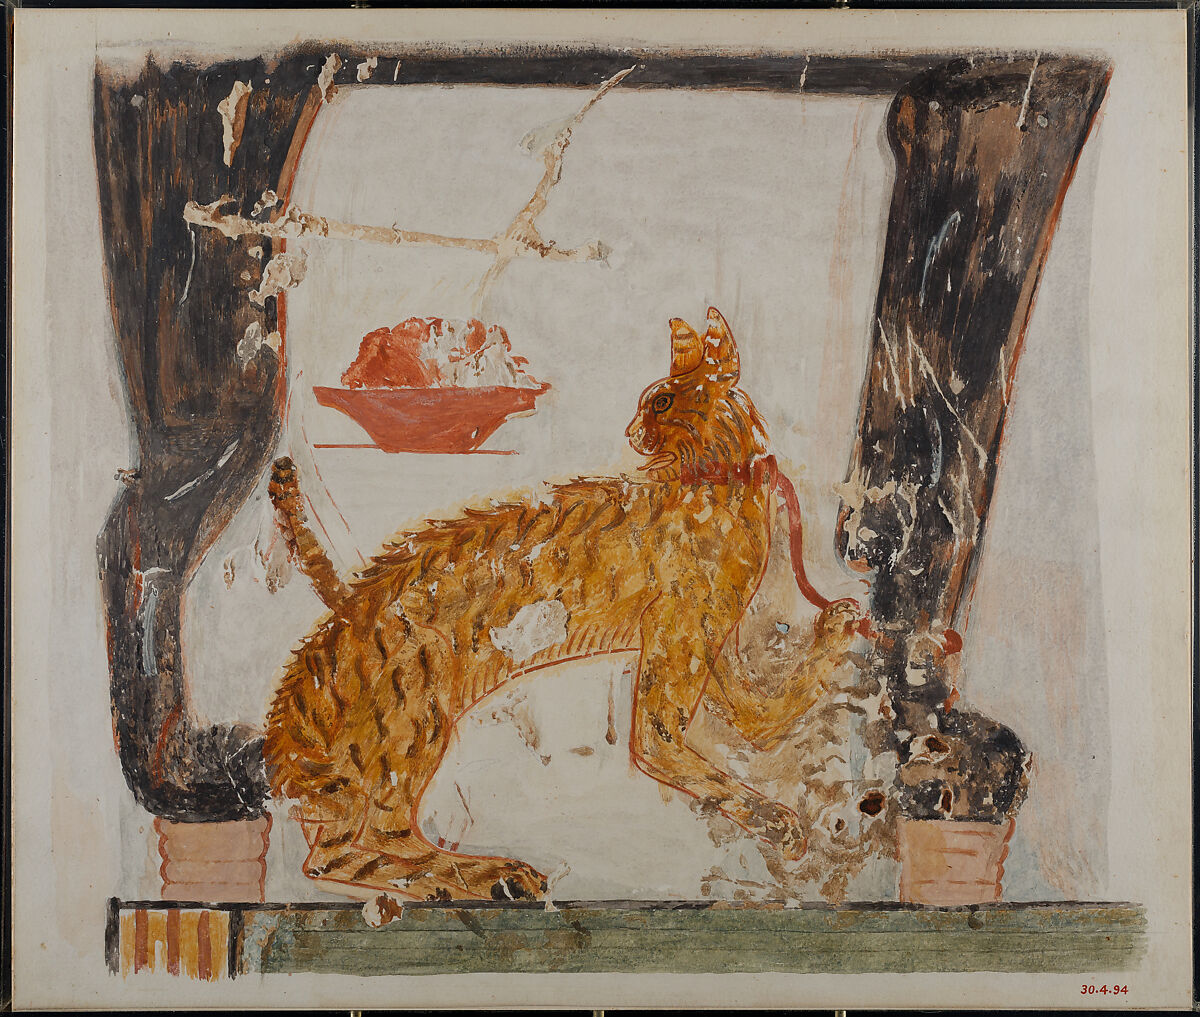 Cat Seated under a Chair, Hugh R. Hopgood, Tempera on Paper 